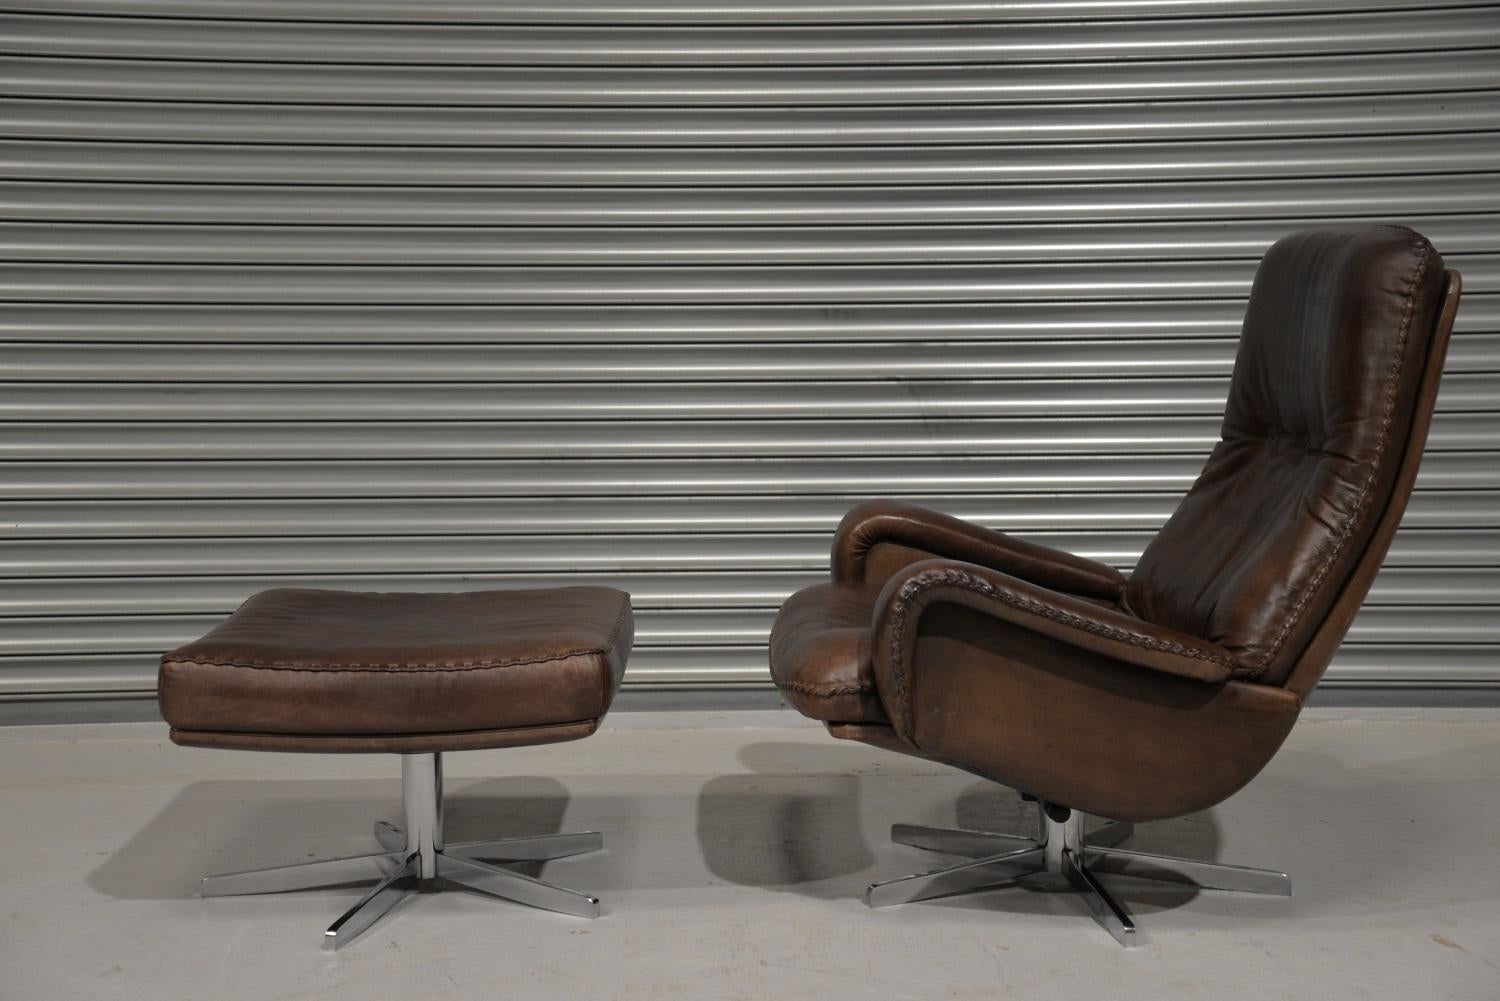 Discounted airfreight for our US and International customers (from 2 weeks door to door)

We are delighted to bring to you an ultra rare and highly desirable retro De Sede S 231 swivel lounge armchair and ottoman. Hand built in the late 1960s by De